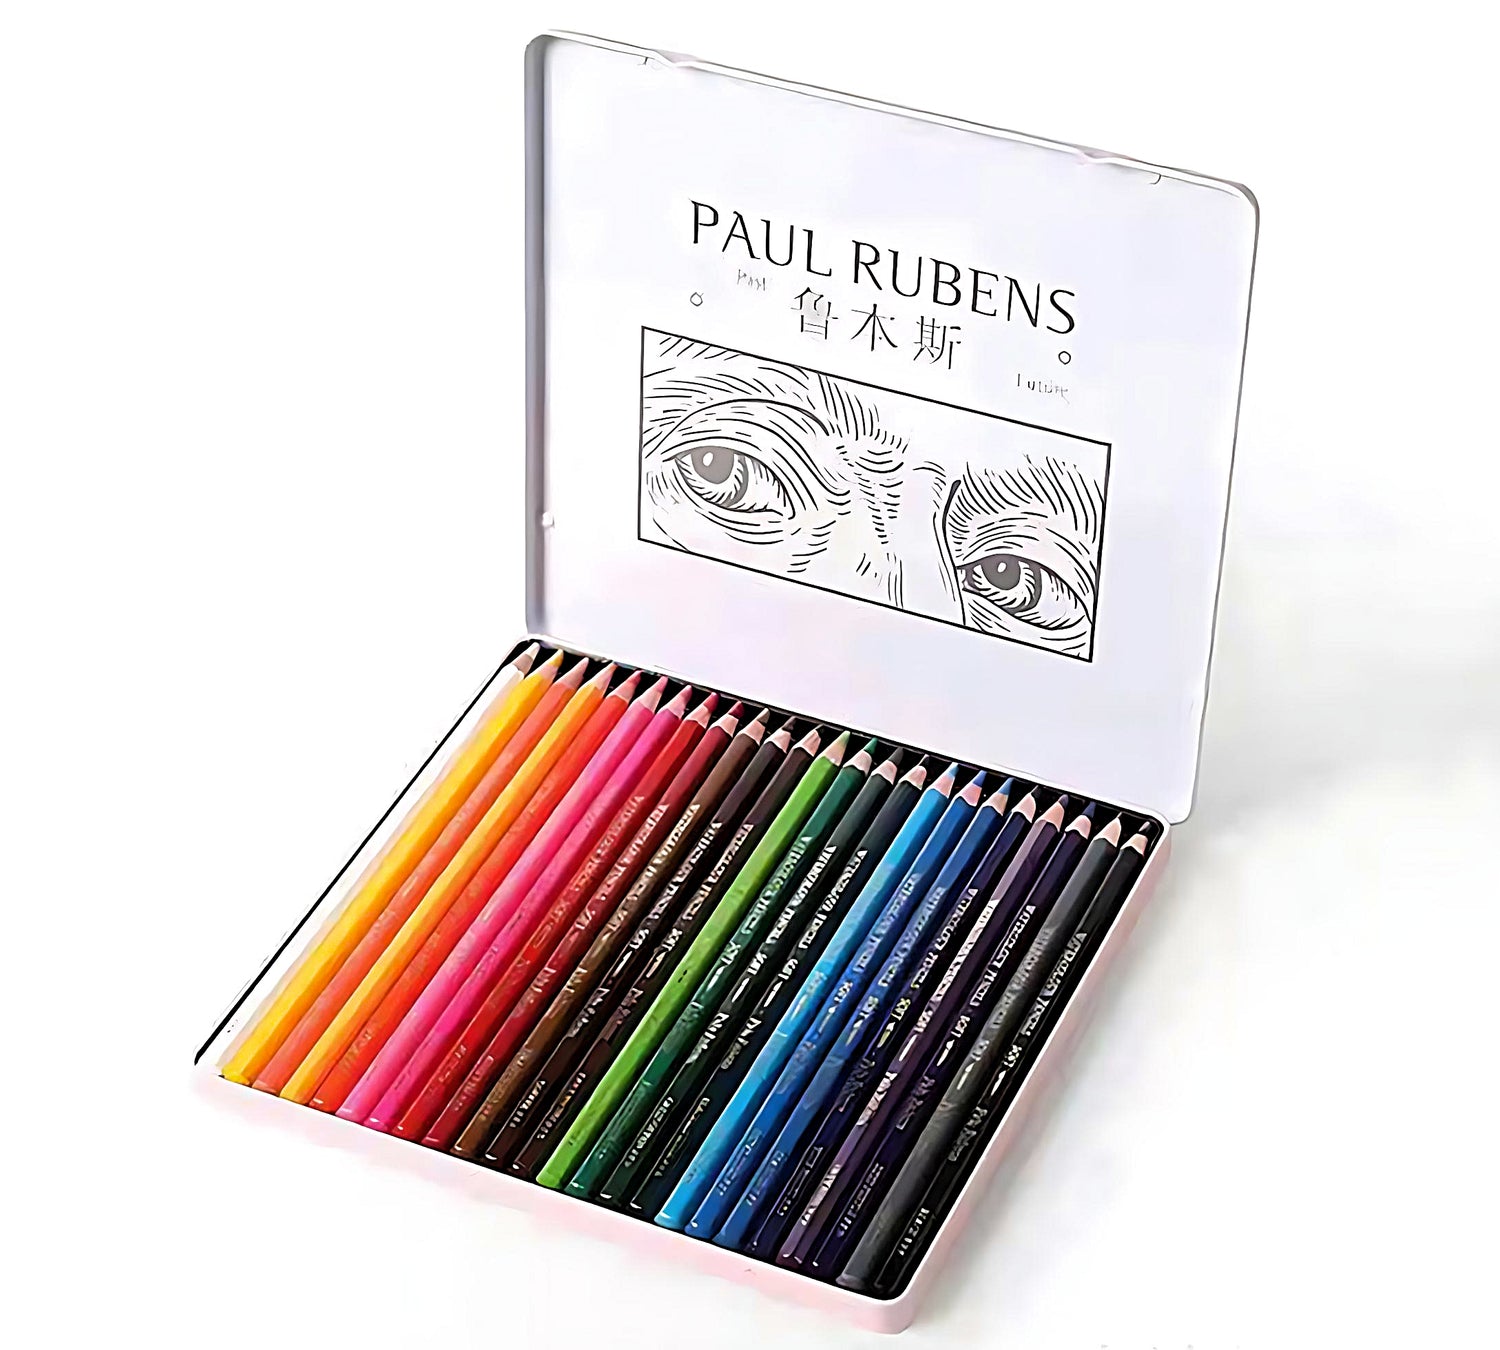 a set of 24 Paul Rubens watercolor pencils in a pink tin box